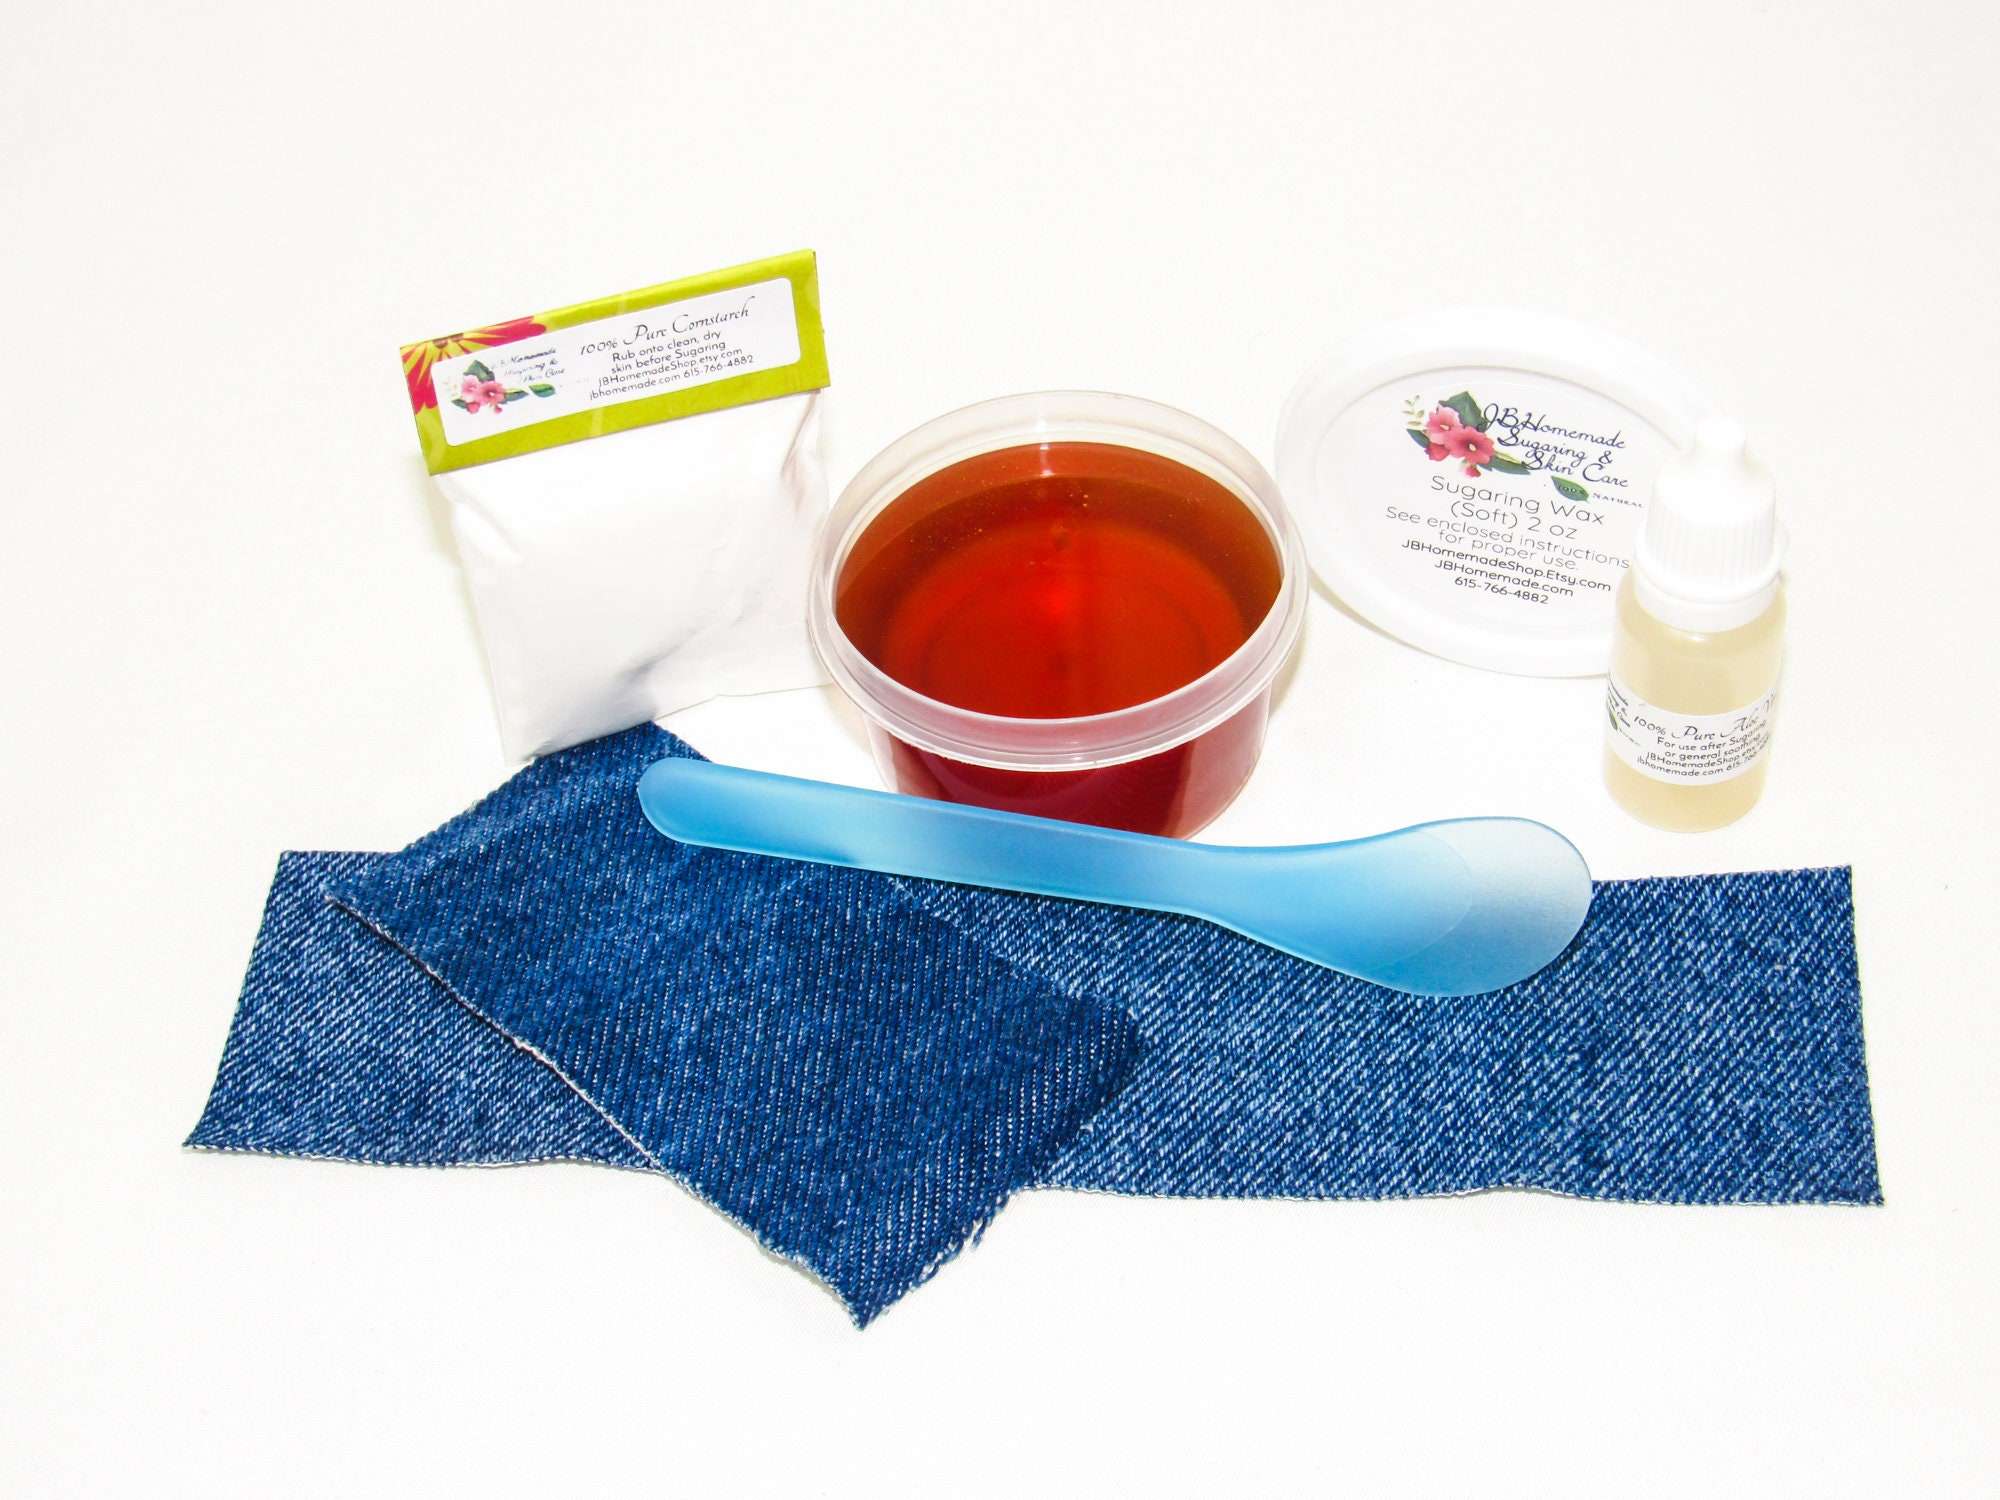 A 2-ounce tub of JBHomemade Sugaring wax is presented with its included pouch of cornstarch, denim strips, bottle of aloe vera and applicator.